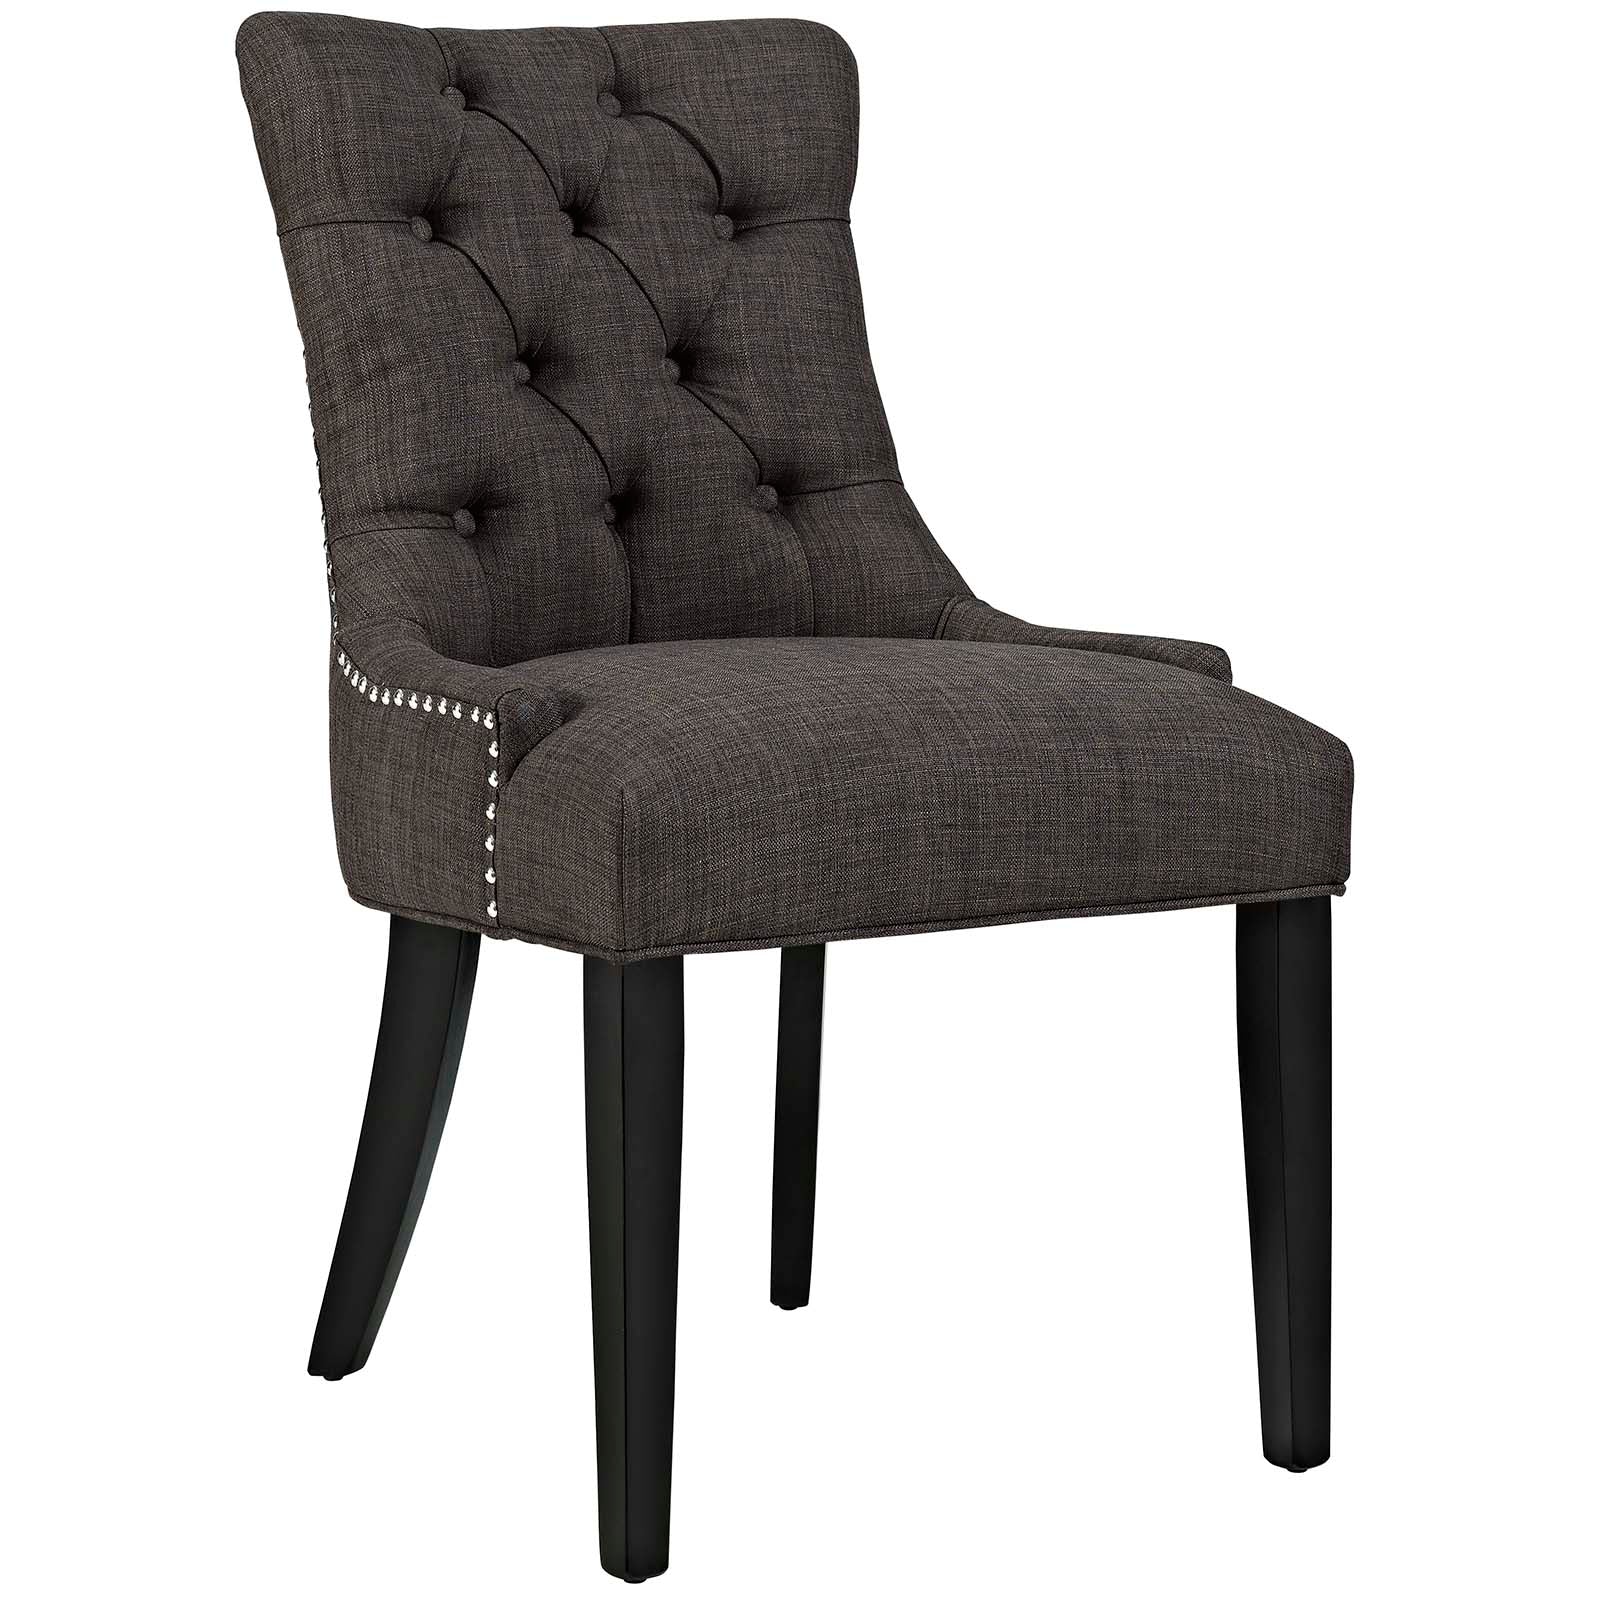 Modway Dining Chairs - Regent Tufted Fabric Dining Side Chair Brown